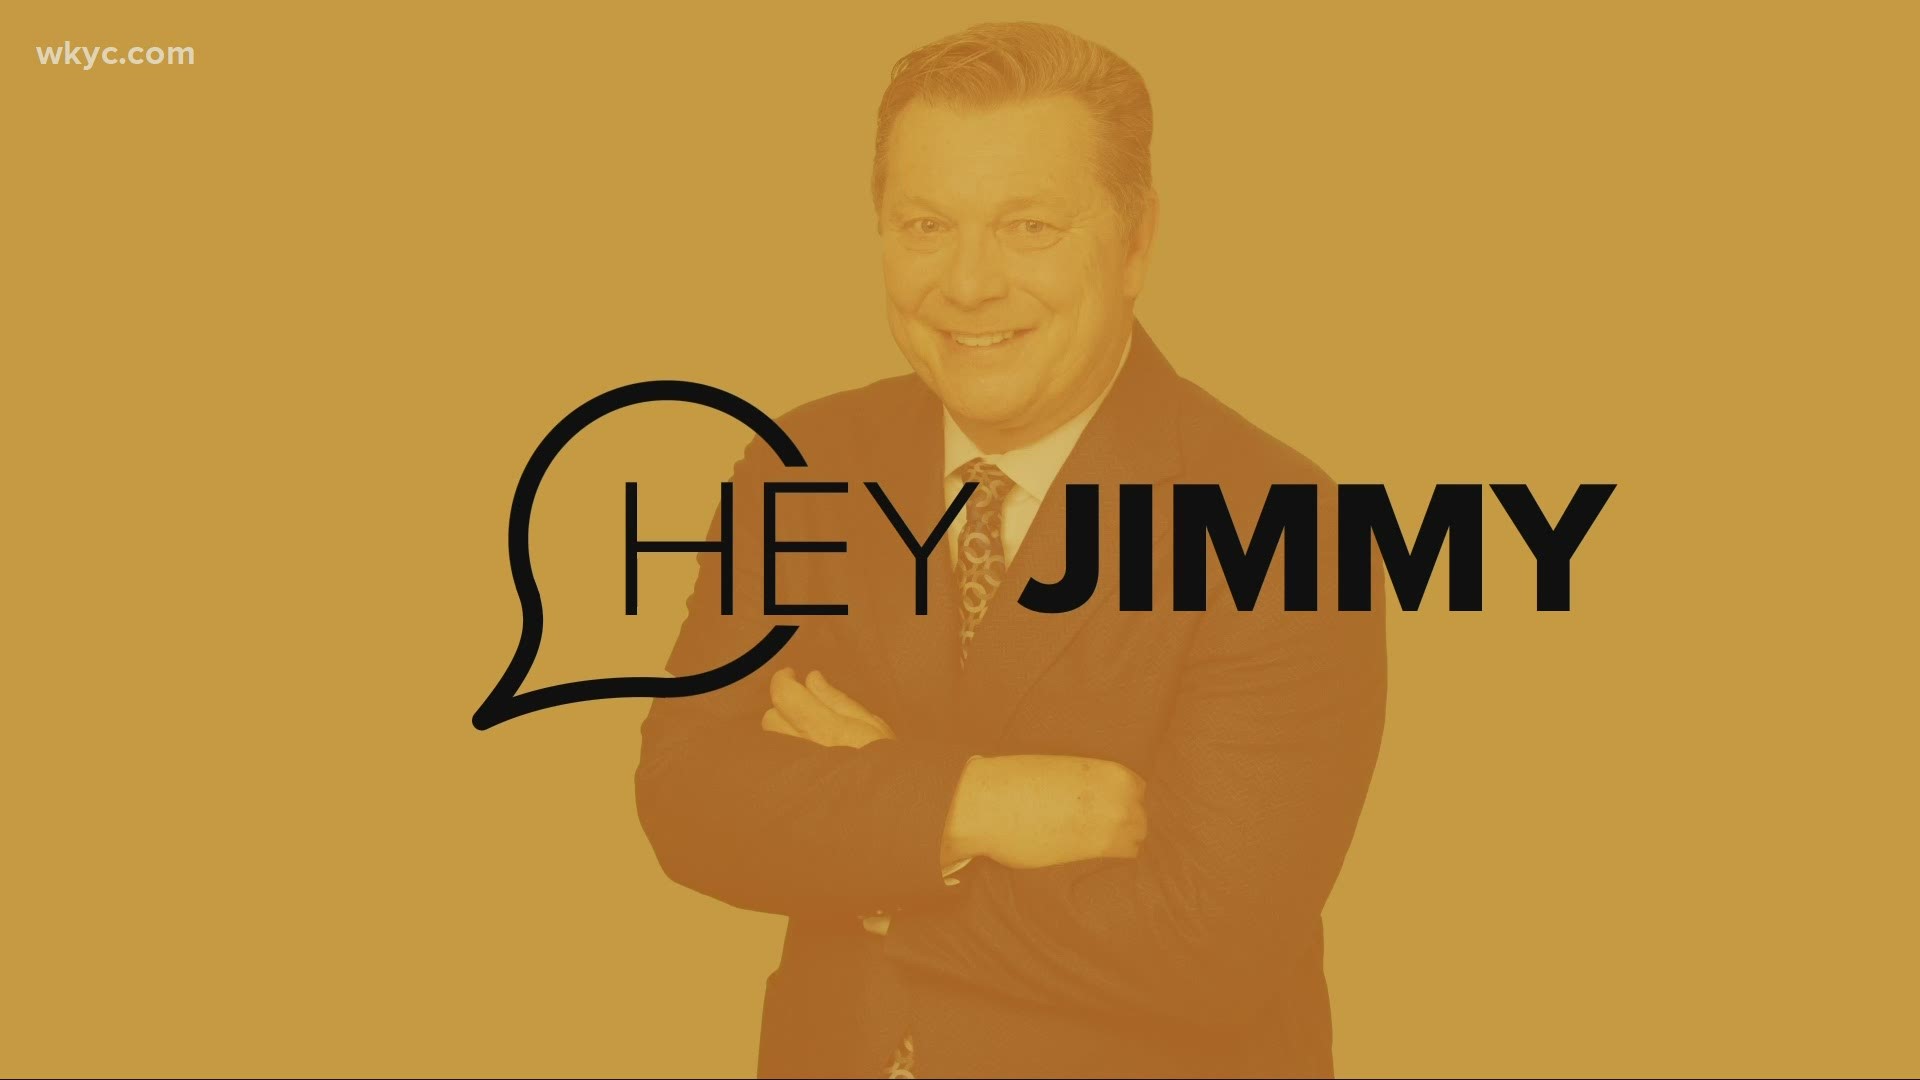 The Browns are 5-2 after their win in Cincinnati. Jim Donovan opens the mailbag to answer your questions on 'Hey Jimmy.'